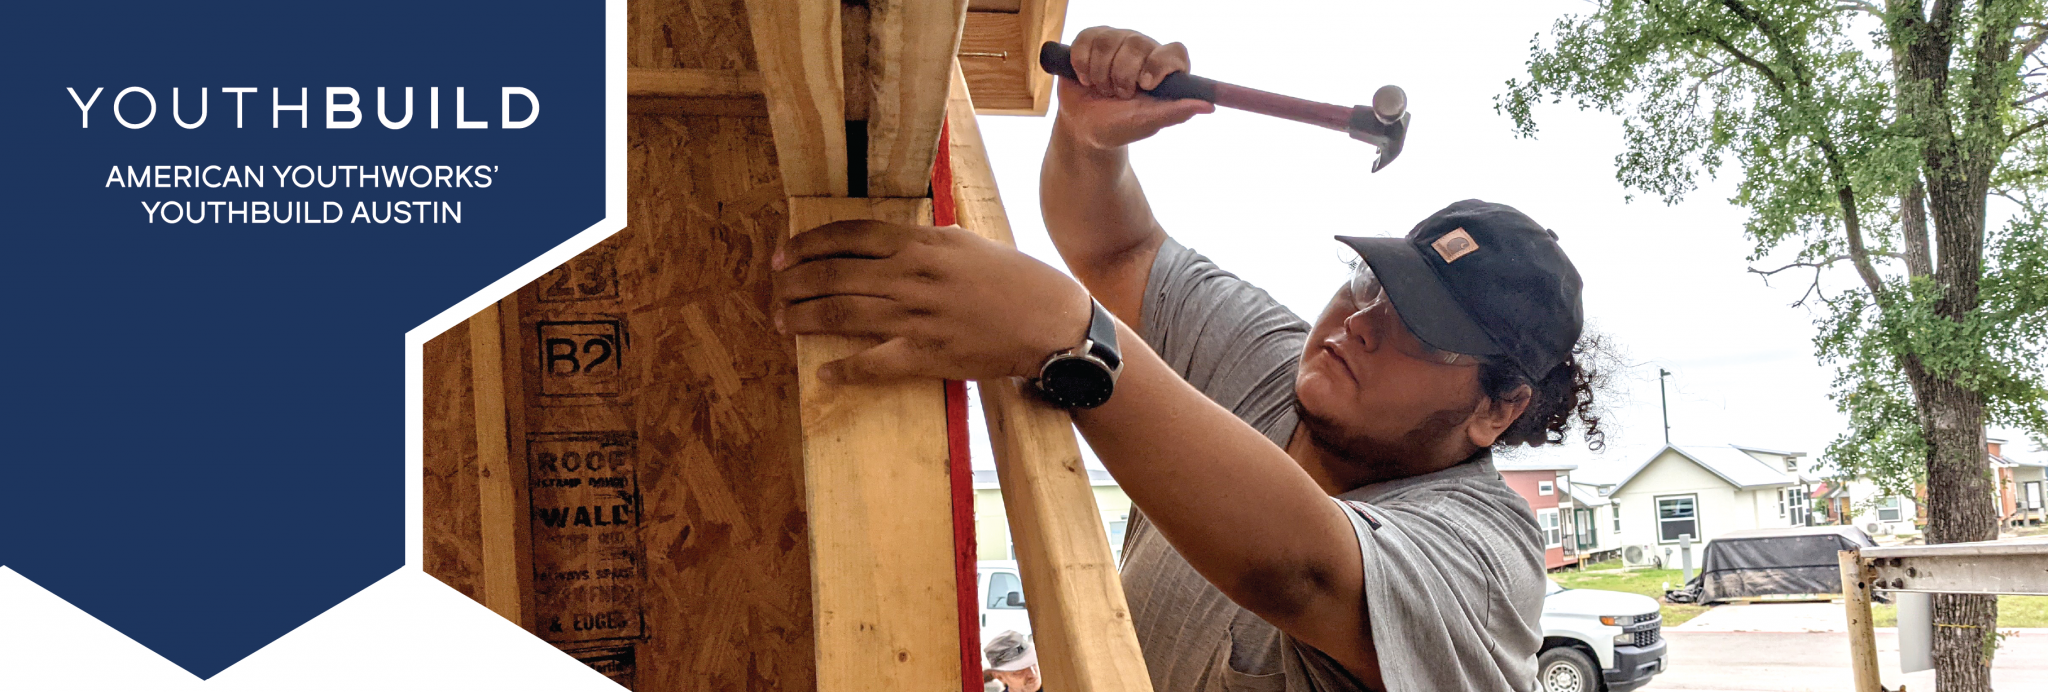 The YouthBuild Austin logo, and a close up of a YouthBuild Austin participant using a hammer and nail to build a house.